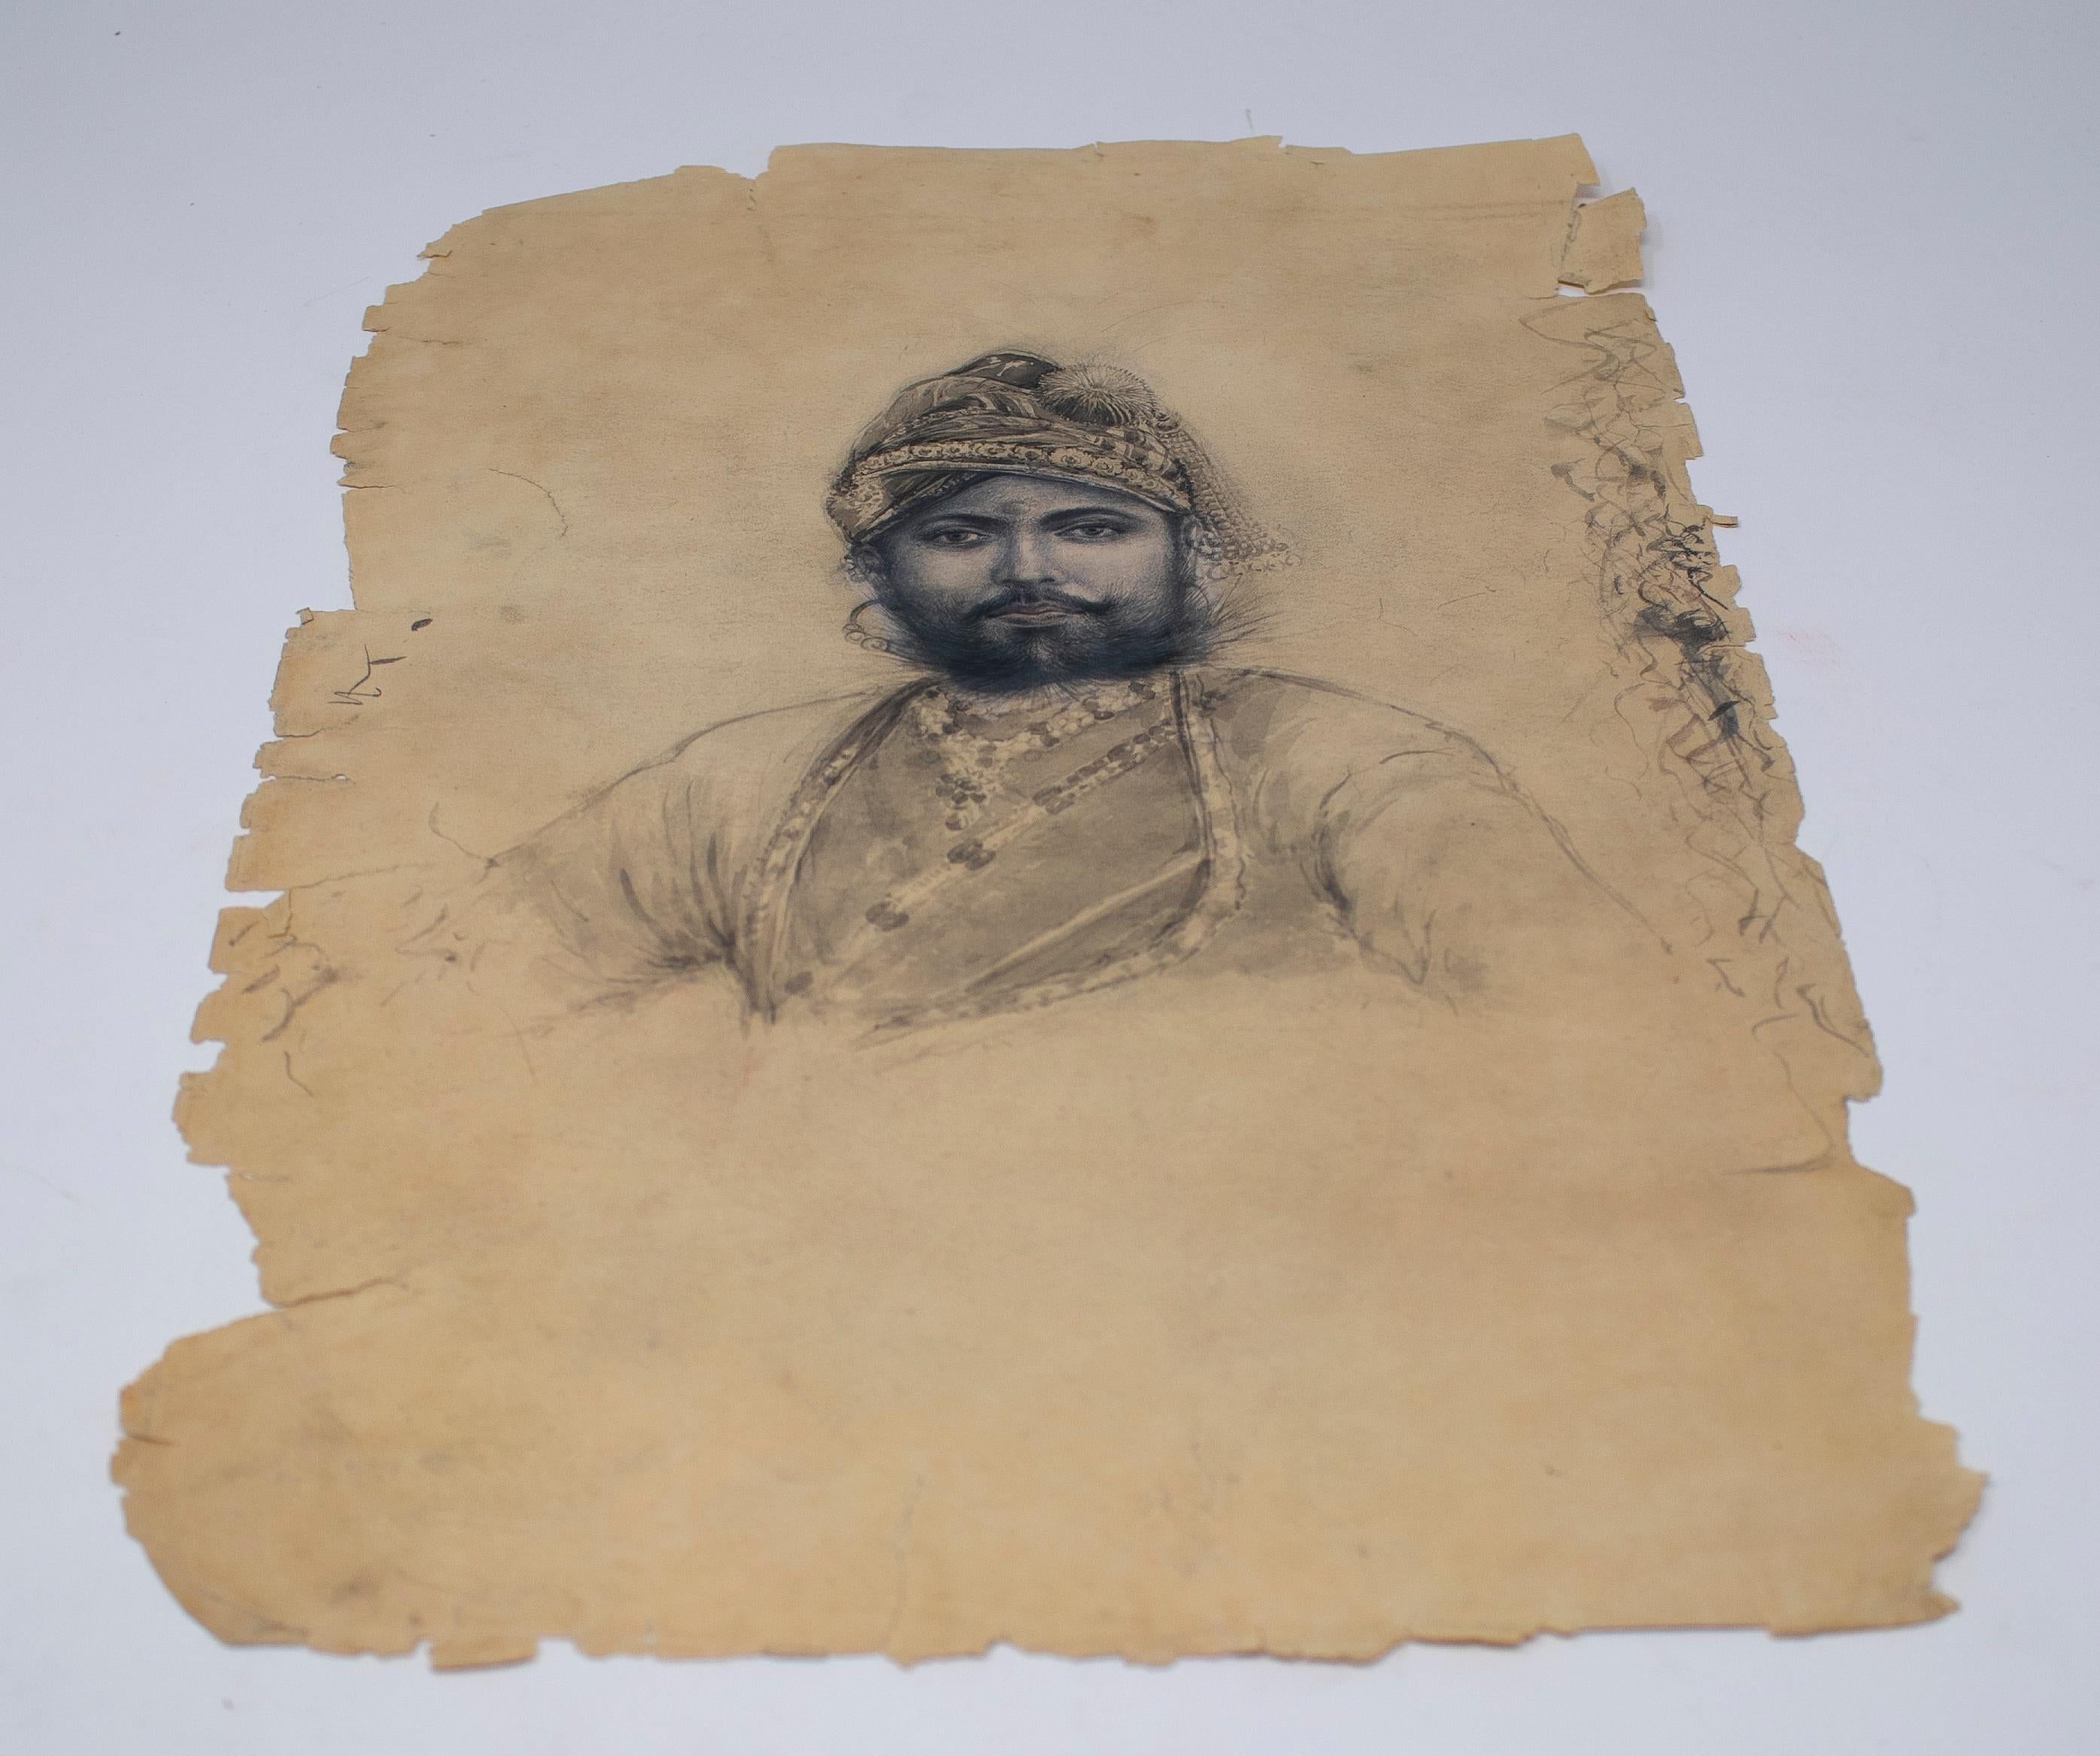 1900s Indian portrait on paper of man with turban. Part of a private collection.